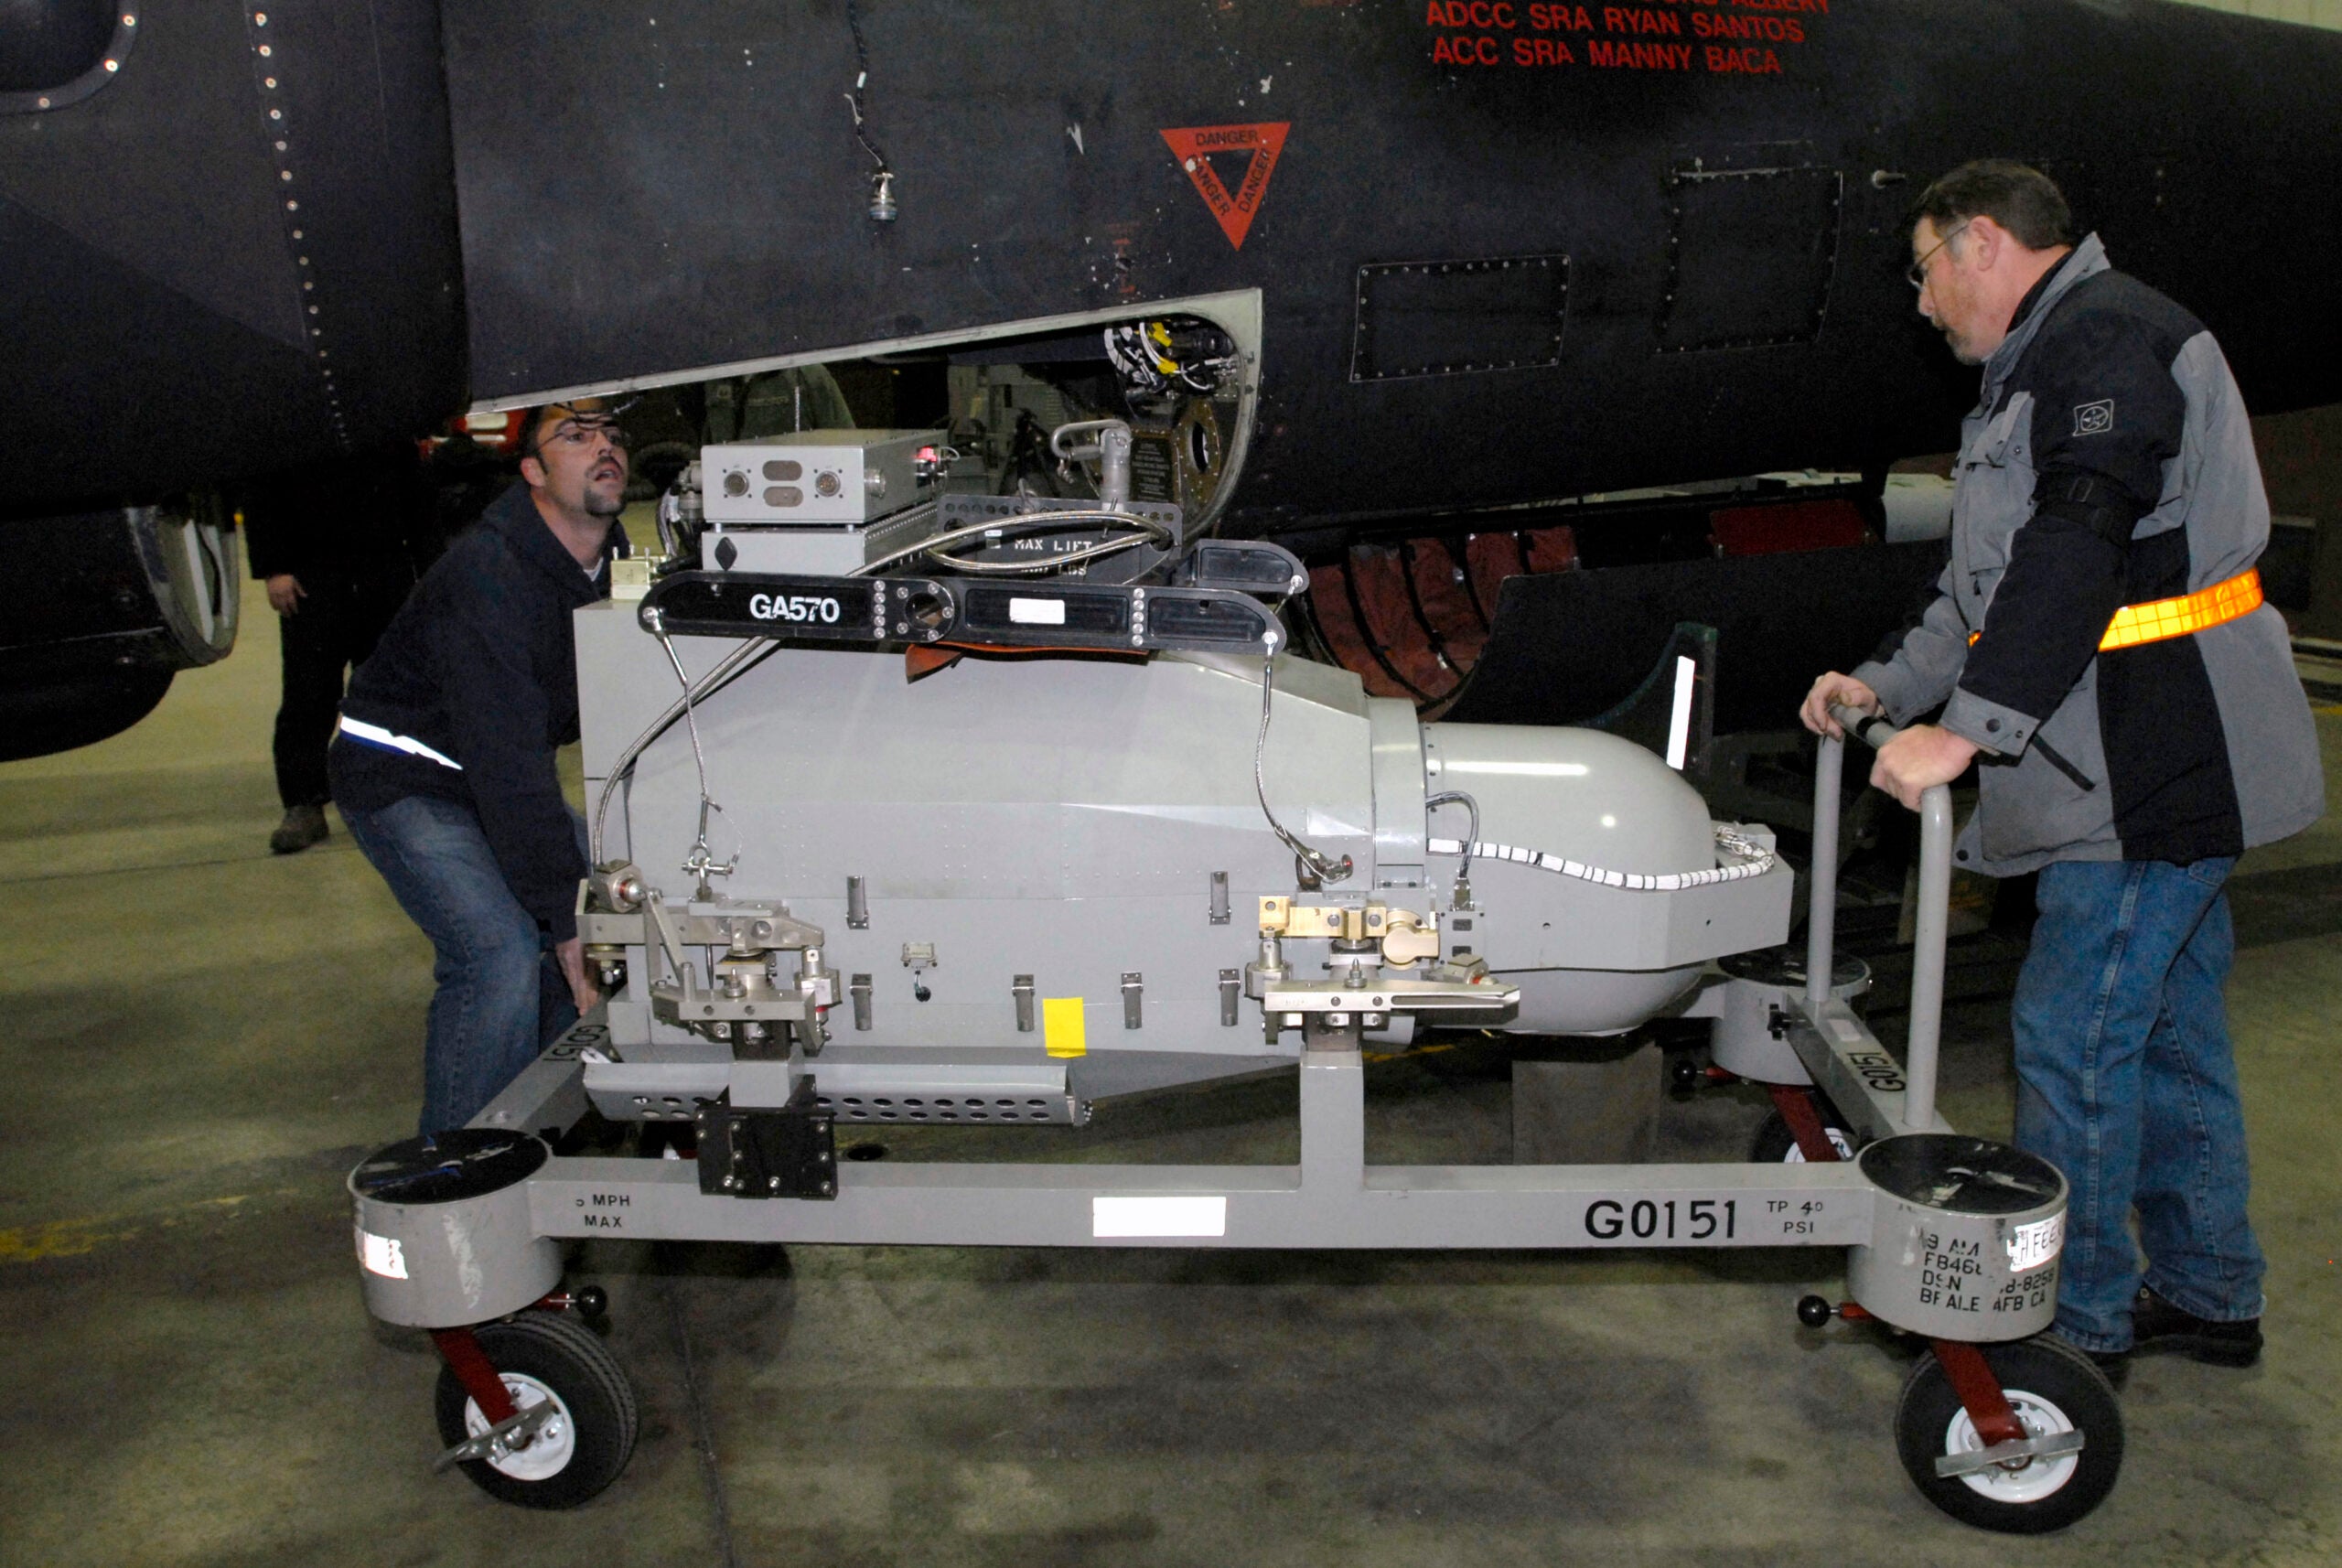 Ron Deagle (left) and Rod Blazvick prepare to load an optical bar camera into a U.S. Air Force U-2 high-altitude, all-weather surveillance and reconnaissance aircraft March 13, 2011, at Osan Air Base, South Korea. The U-2 is being prepared for a humanitarian mission to capture imagery of the earthquake- and tsunami-affected areas of Japan. (U.S. Air Force photo by Senior Master Sgt. Paul Holcomb)